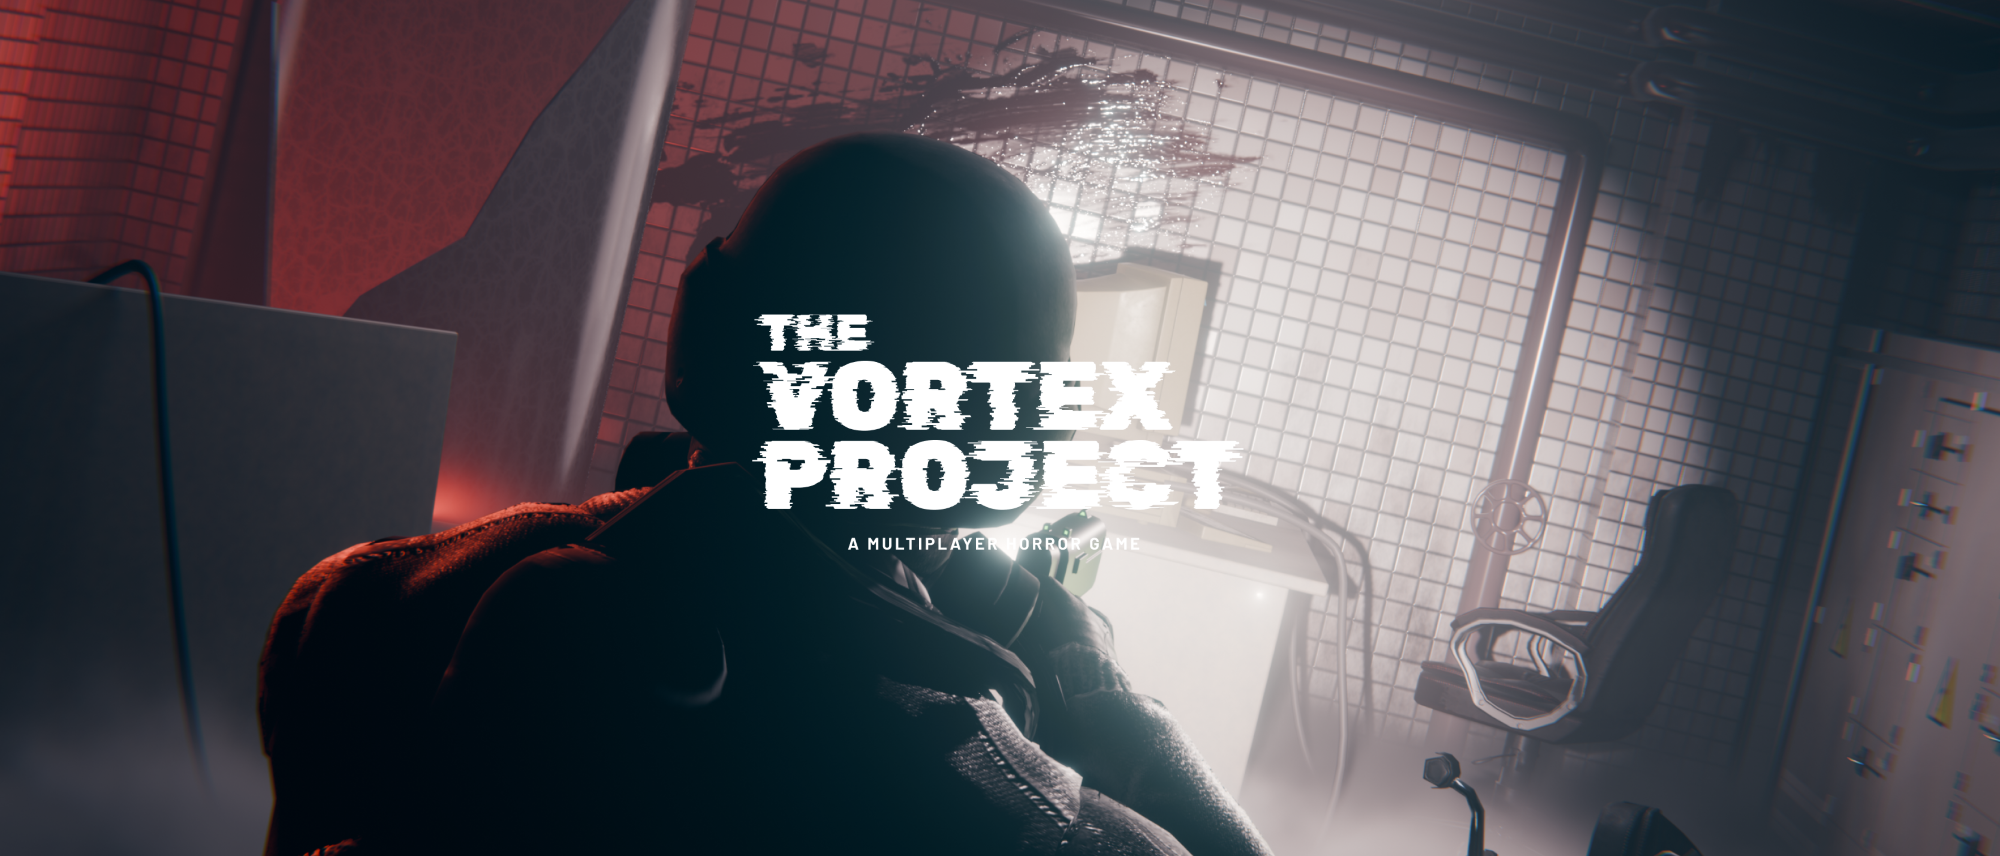 The Vortex Project